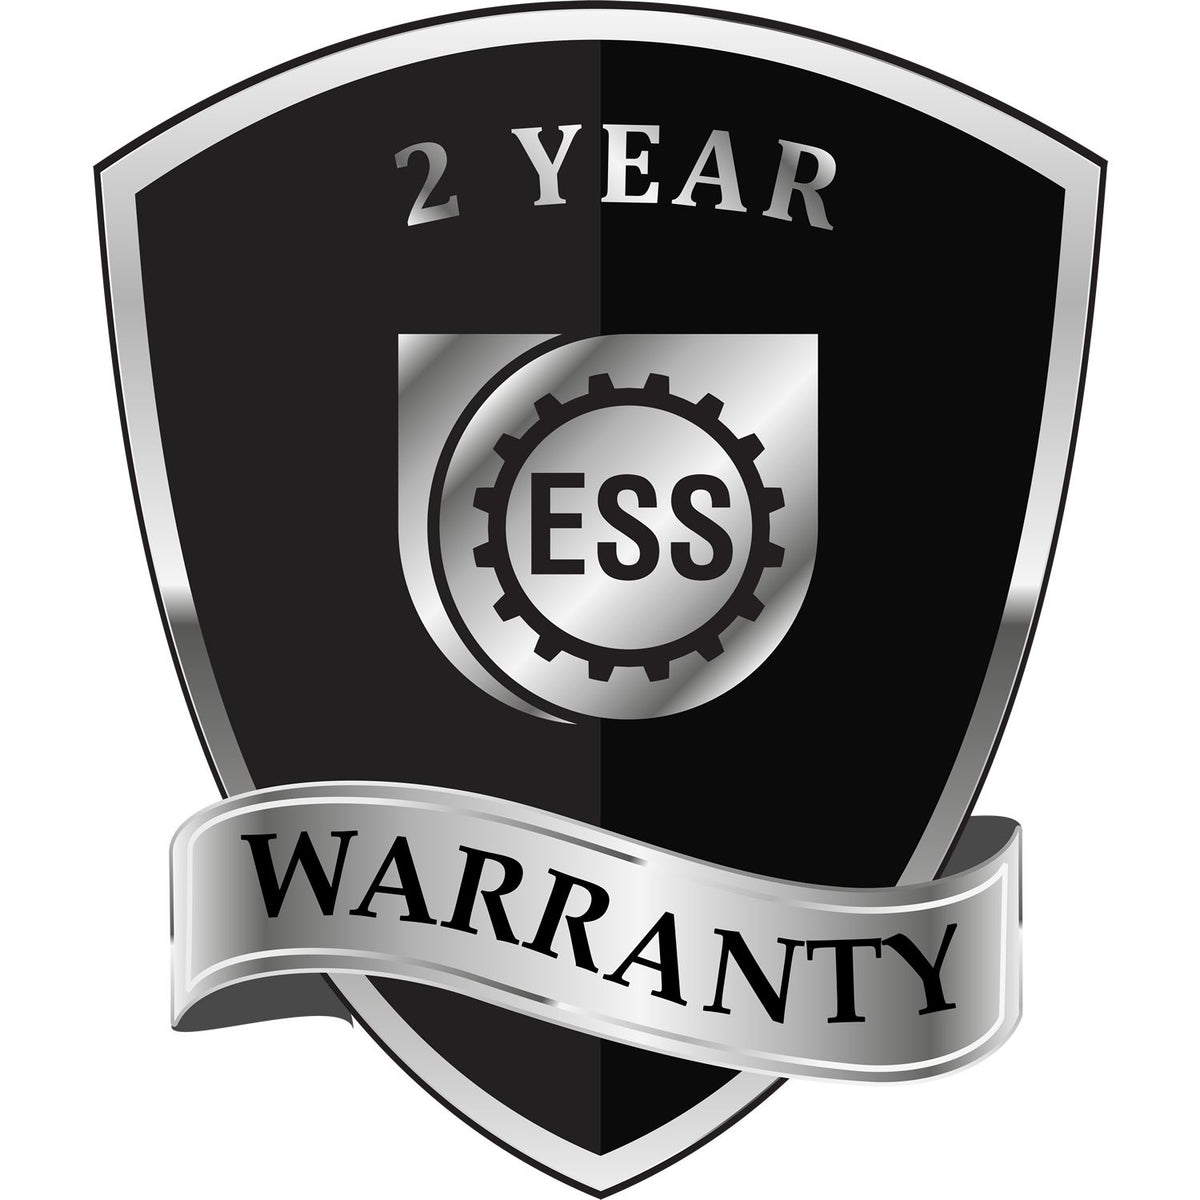 A black and silver badge or emblem showing warranty information for the Gift Arkansas Engineer Seal